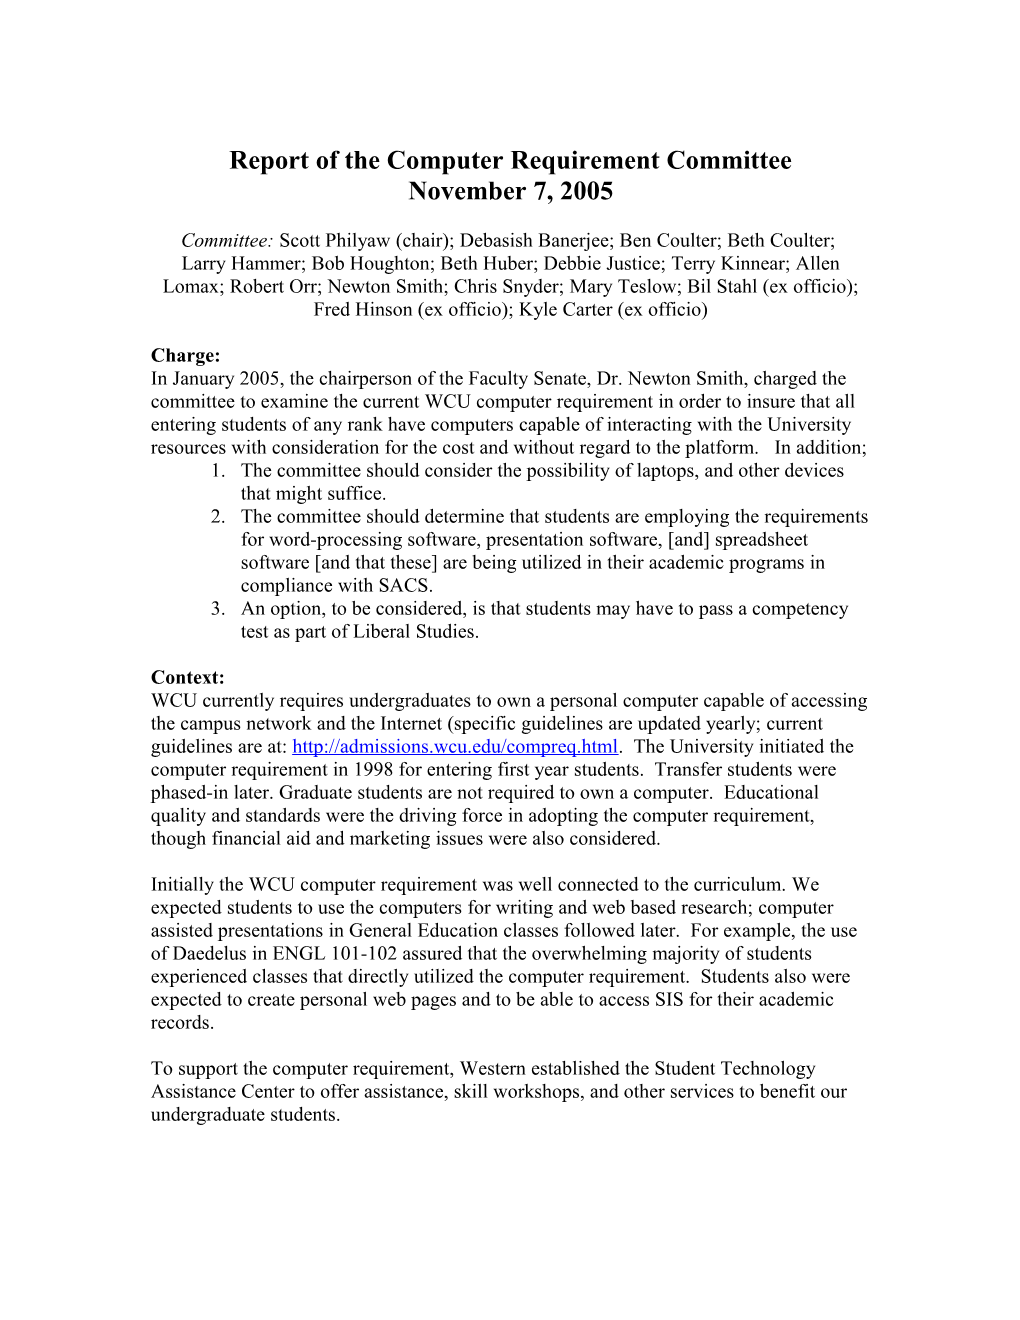 Draft Report of the Computer Requirement Committee